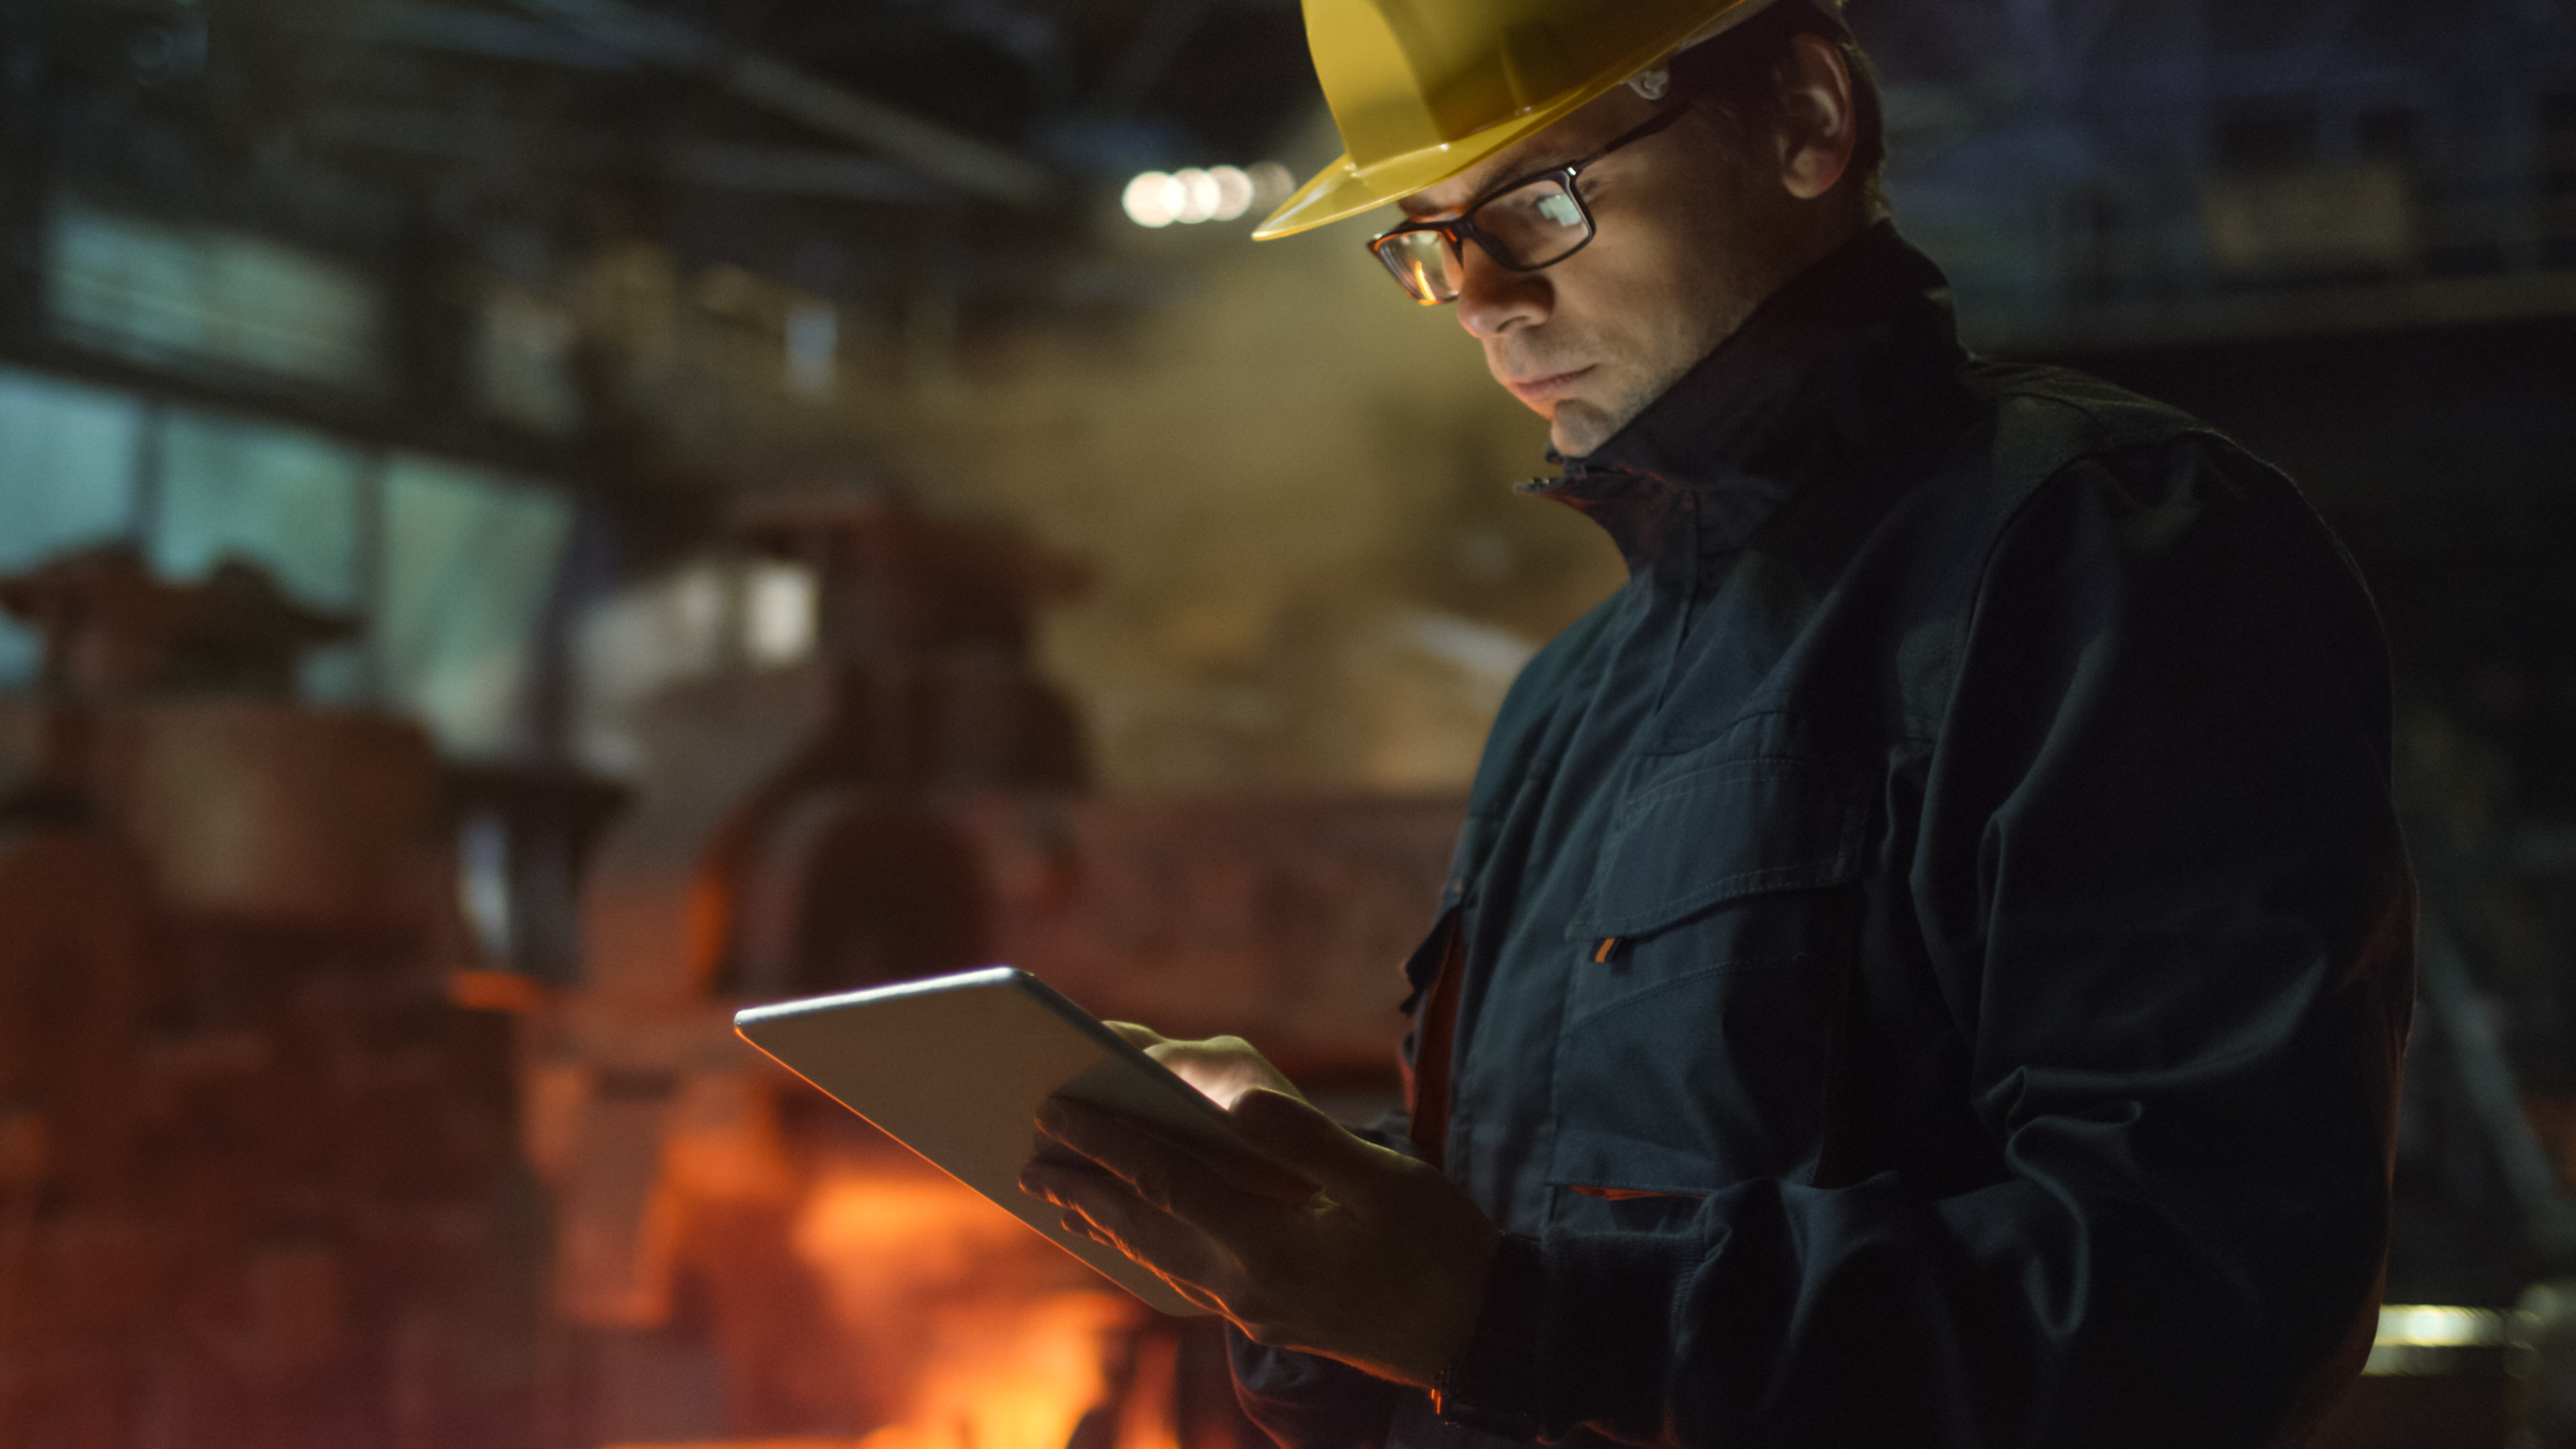 Engineer in Glasses using Tablet PC in Foundry in Industrial Environment to represent technology adoption in manufacturer rep industry